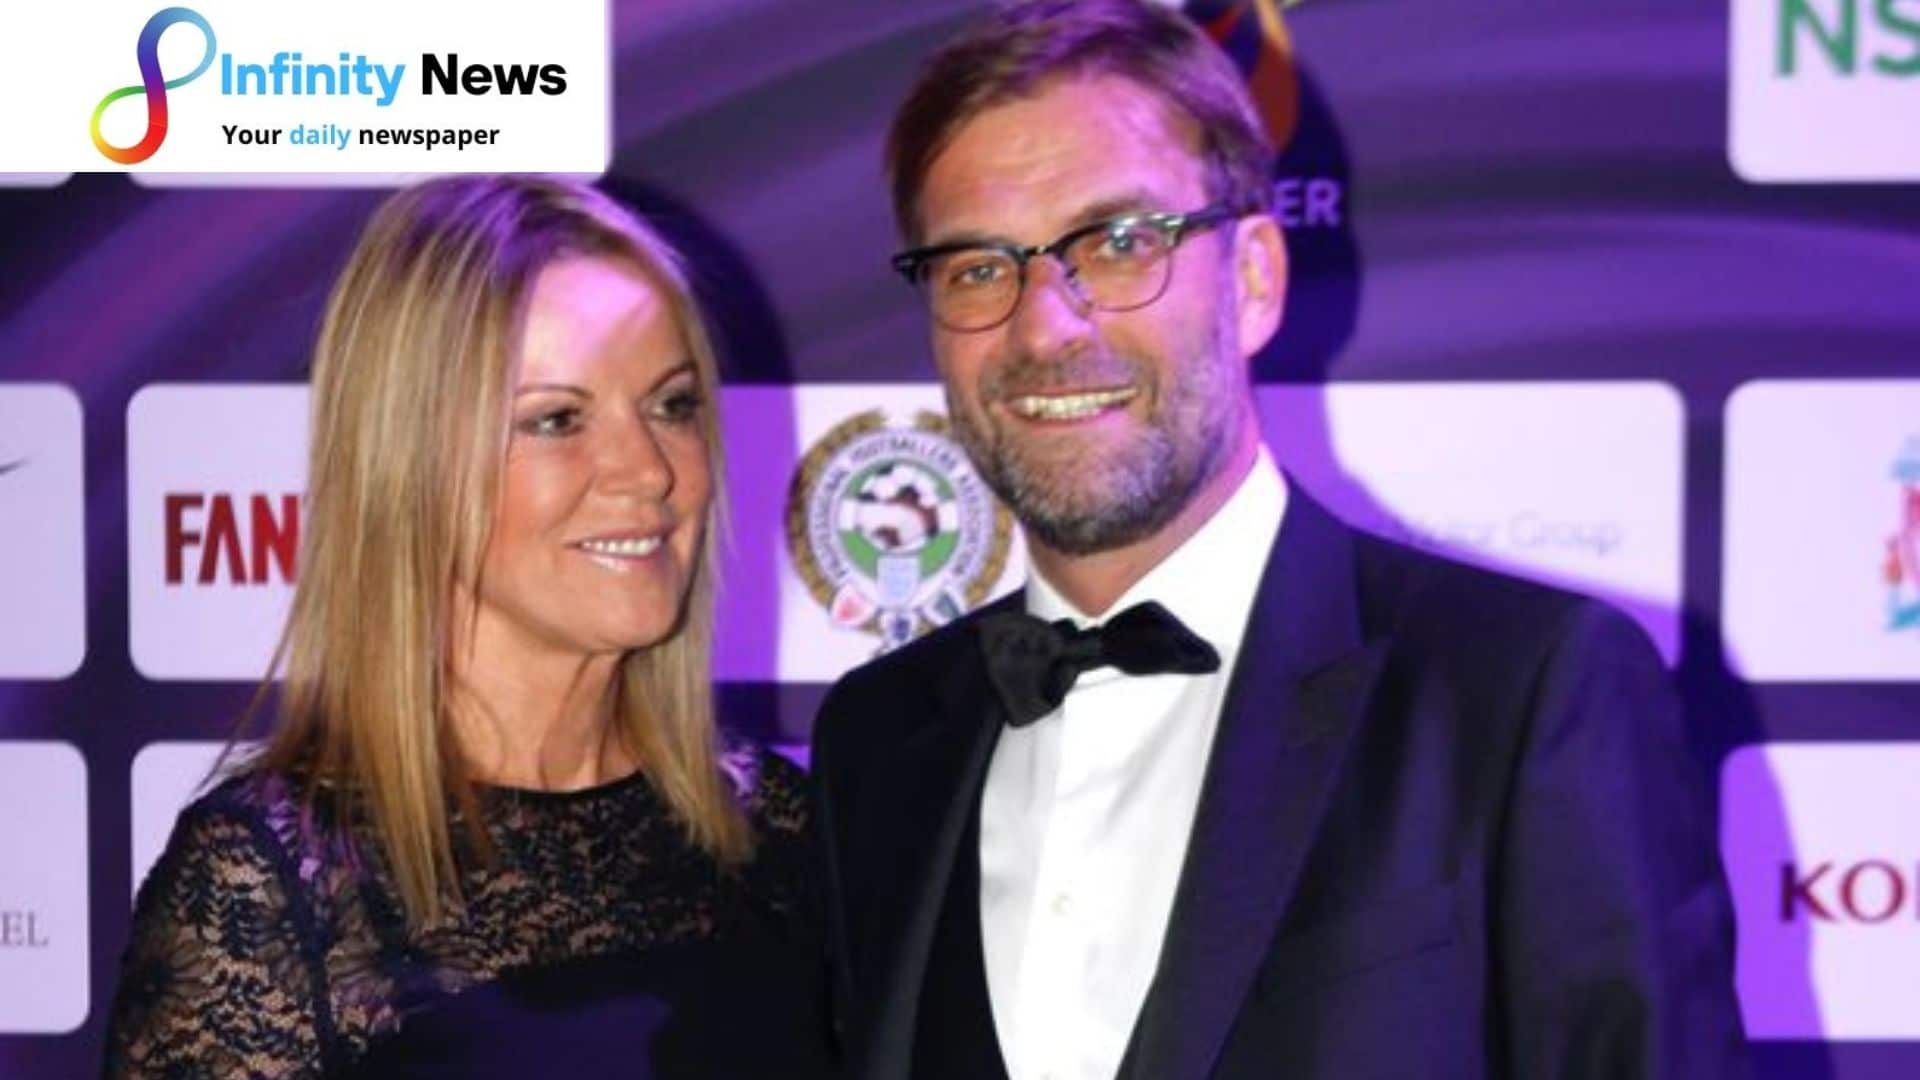 Jurgen Klopp opens up on spouse Ulla's far-fetched job to remain Liverpool